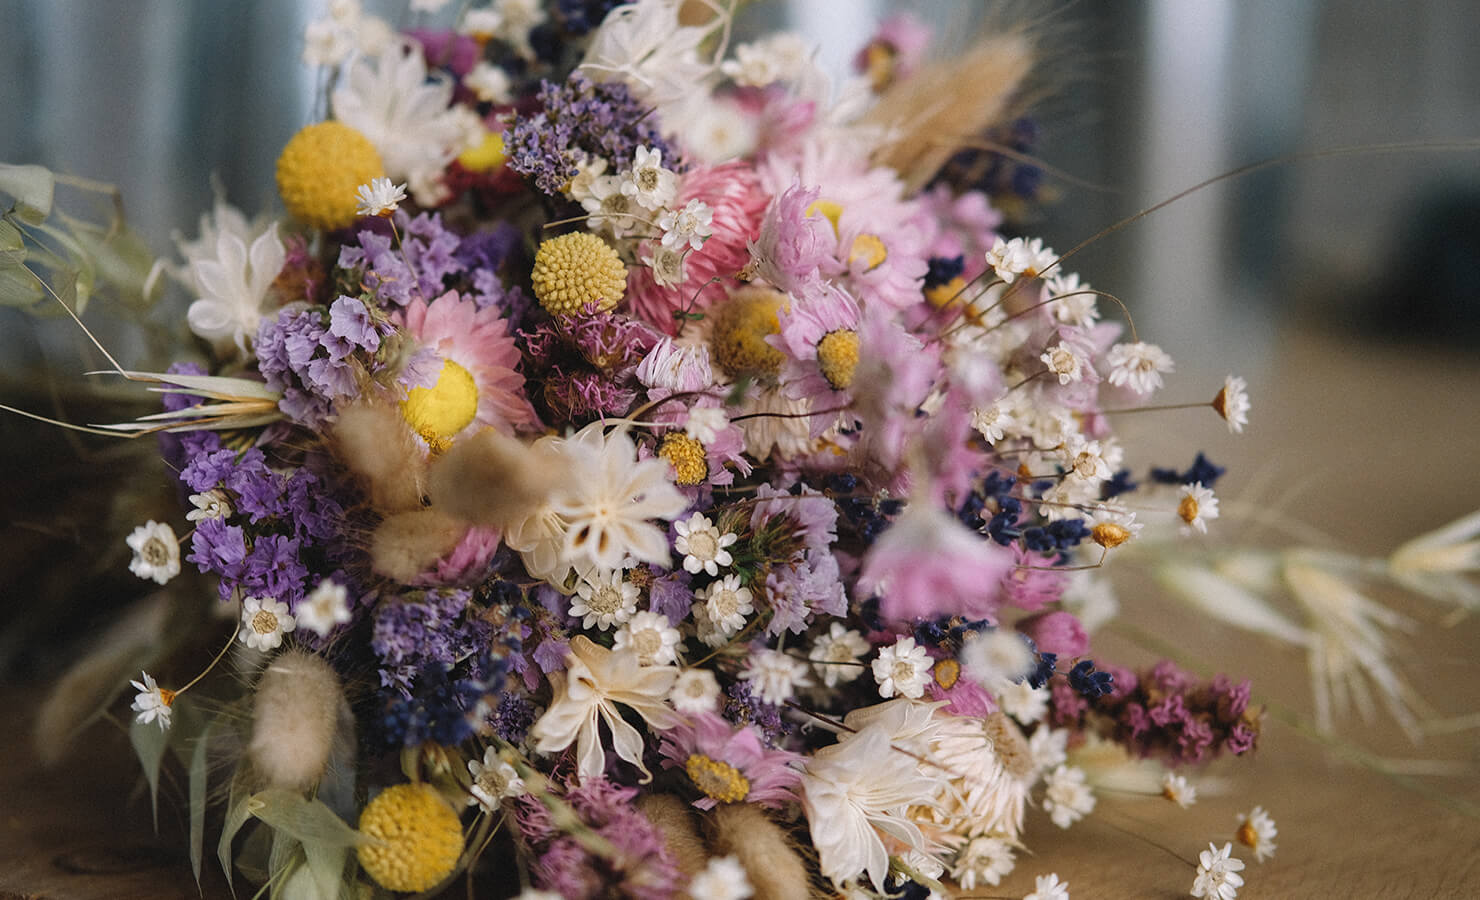 How to make a gorgeous dried flower bouquet in 9 easy steps